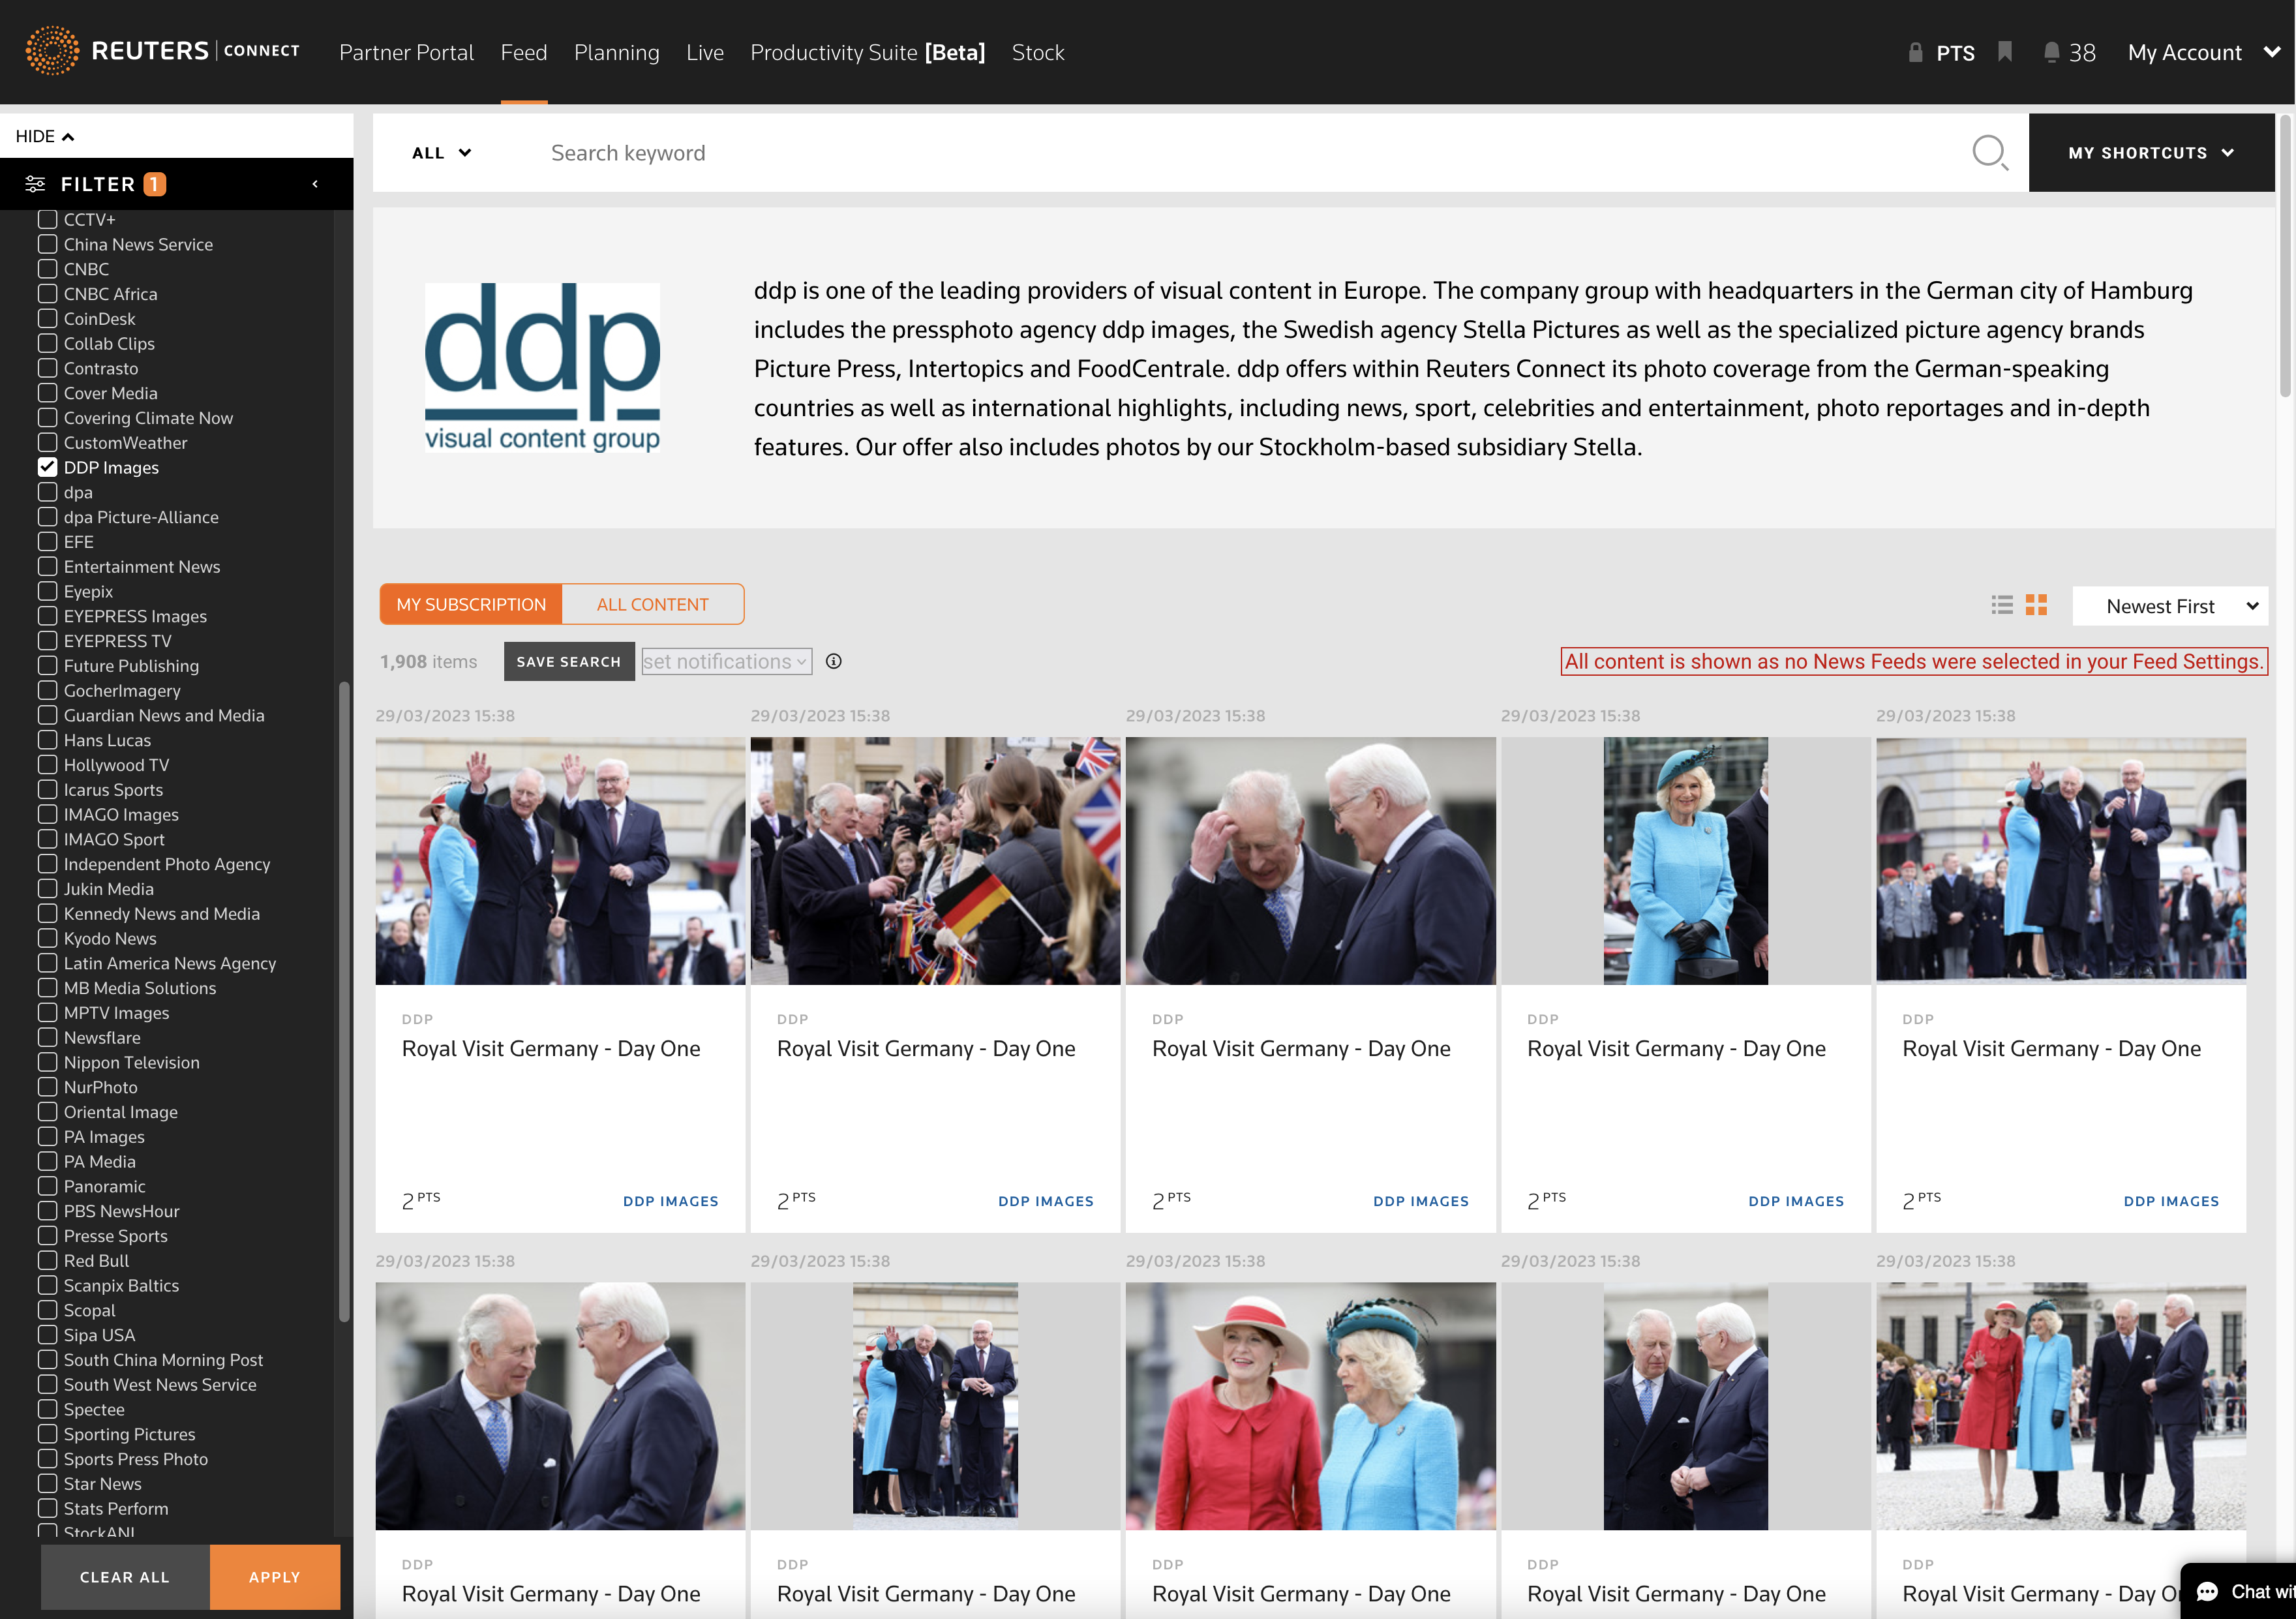 ddp new content partner on Reuters Connect